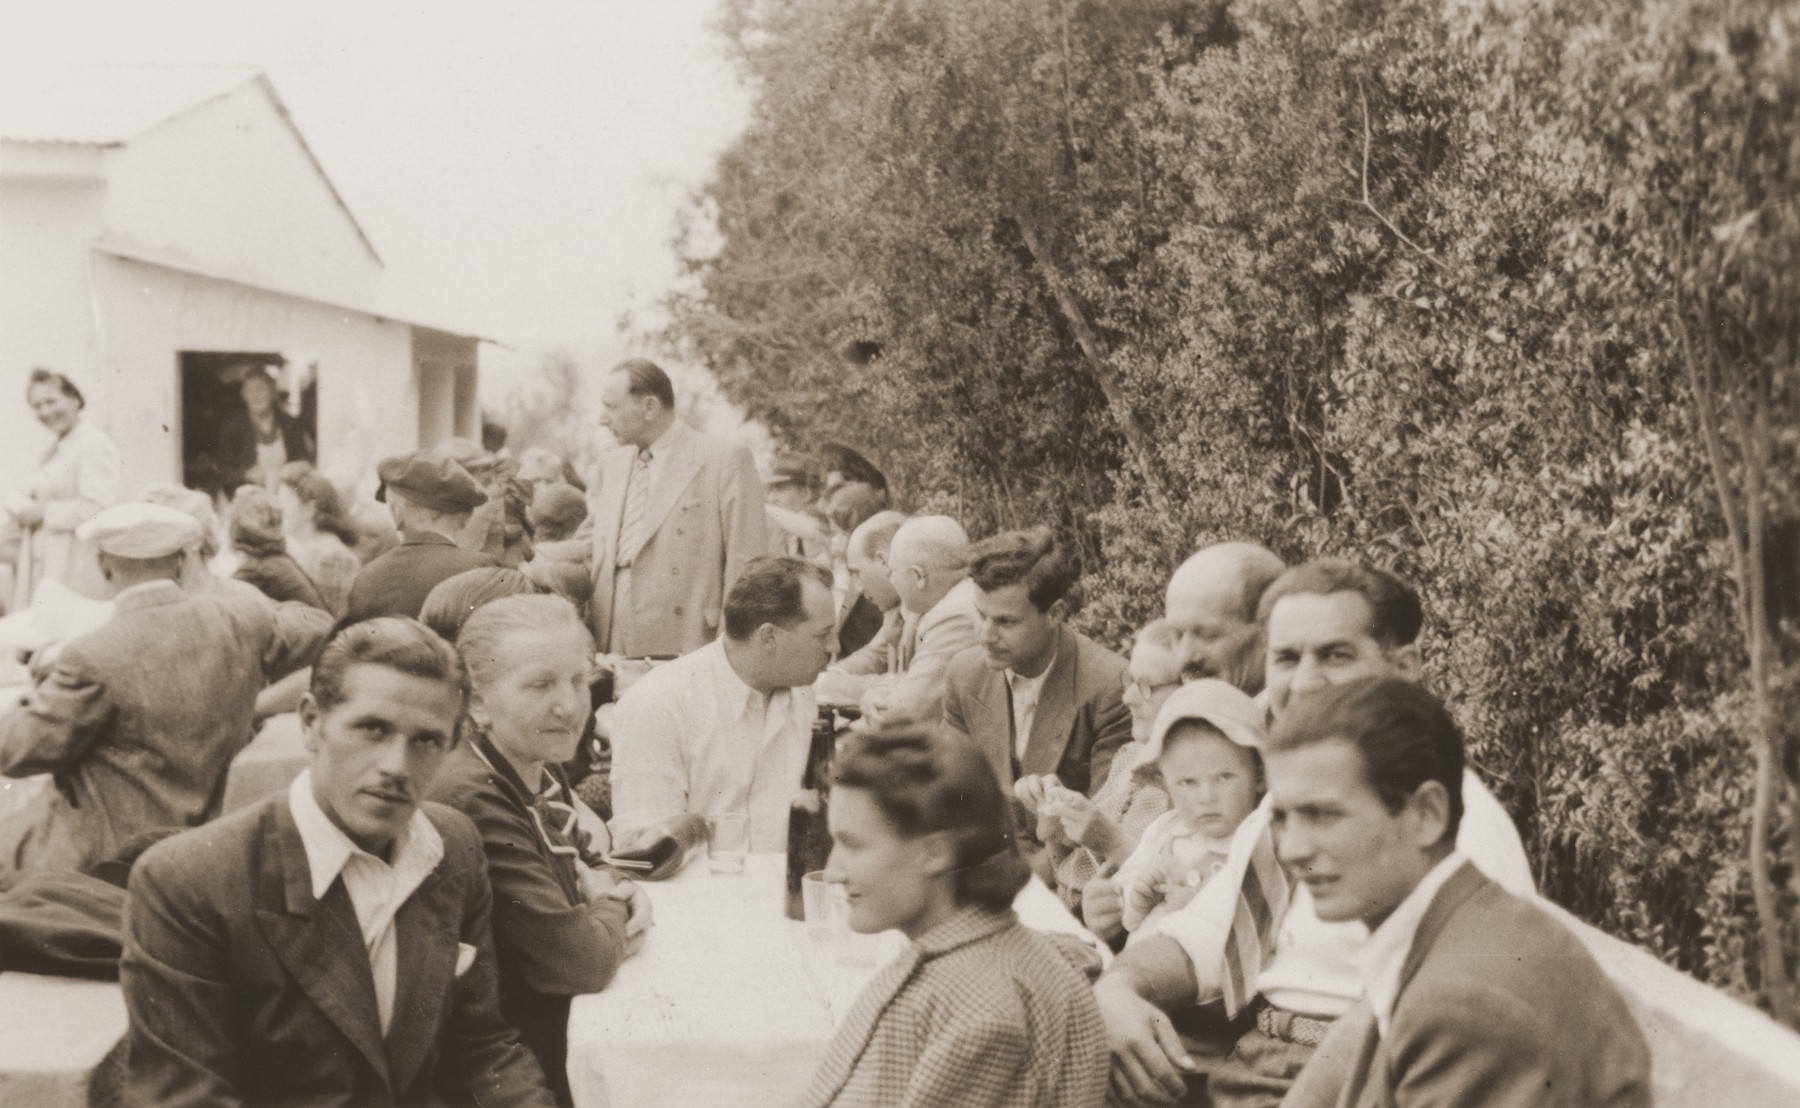 Austrian Jewish refugees in La Paz meet in a restaurant [Quinta Elma] to raise money for the victims of the Orazio shipwreck.

Among those pictured are Ferry Kohn (front, left); Lina Spitzer (behind Kohn); Rosie Spitzer (front, center); Julius Wolfinger (front, right); Eugen Spitzer (holding baby Leo); and Nathan Wolfinger (behind Leo).